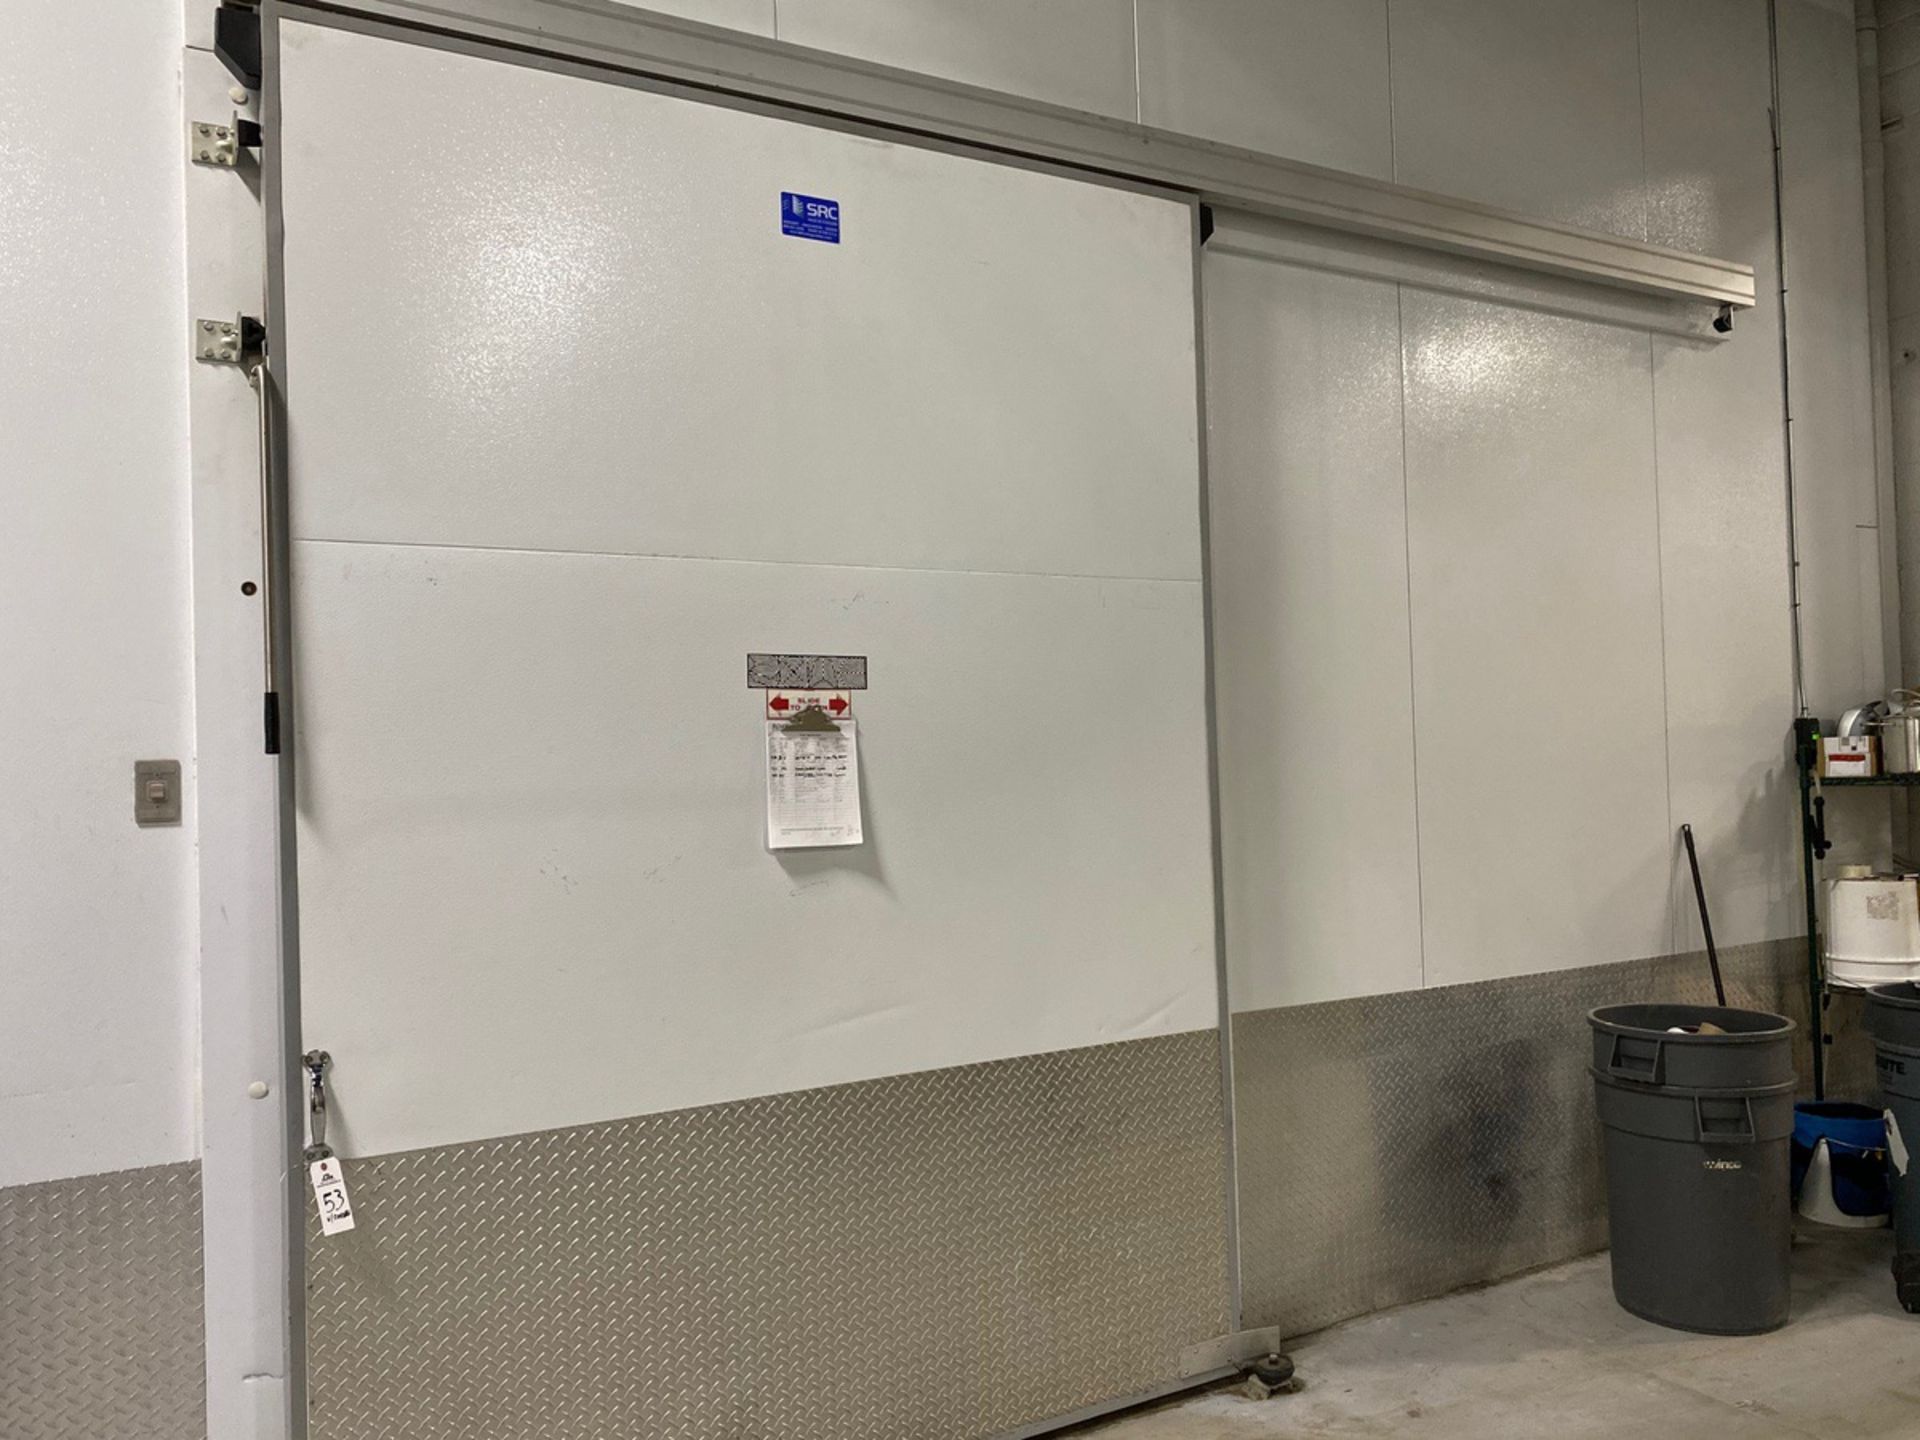 2015 SRC Walk-in Cooler, Approx Outside Dims: 30ft x 30ft x 17ft - Subj to Bulks | Rig Fee: $8500 - Image 5 of 11